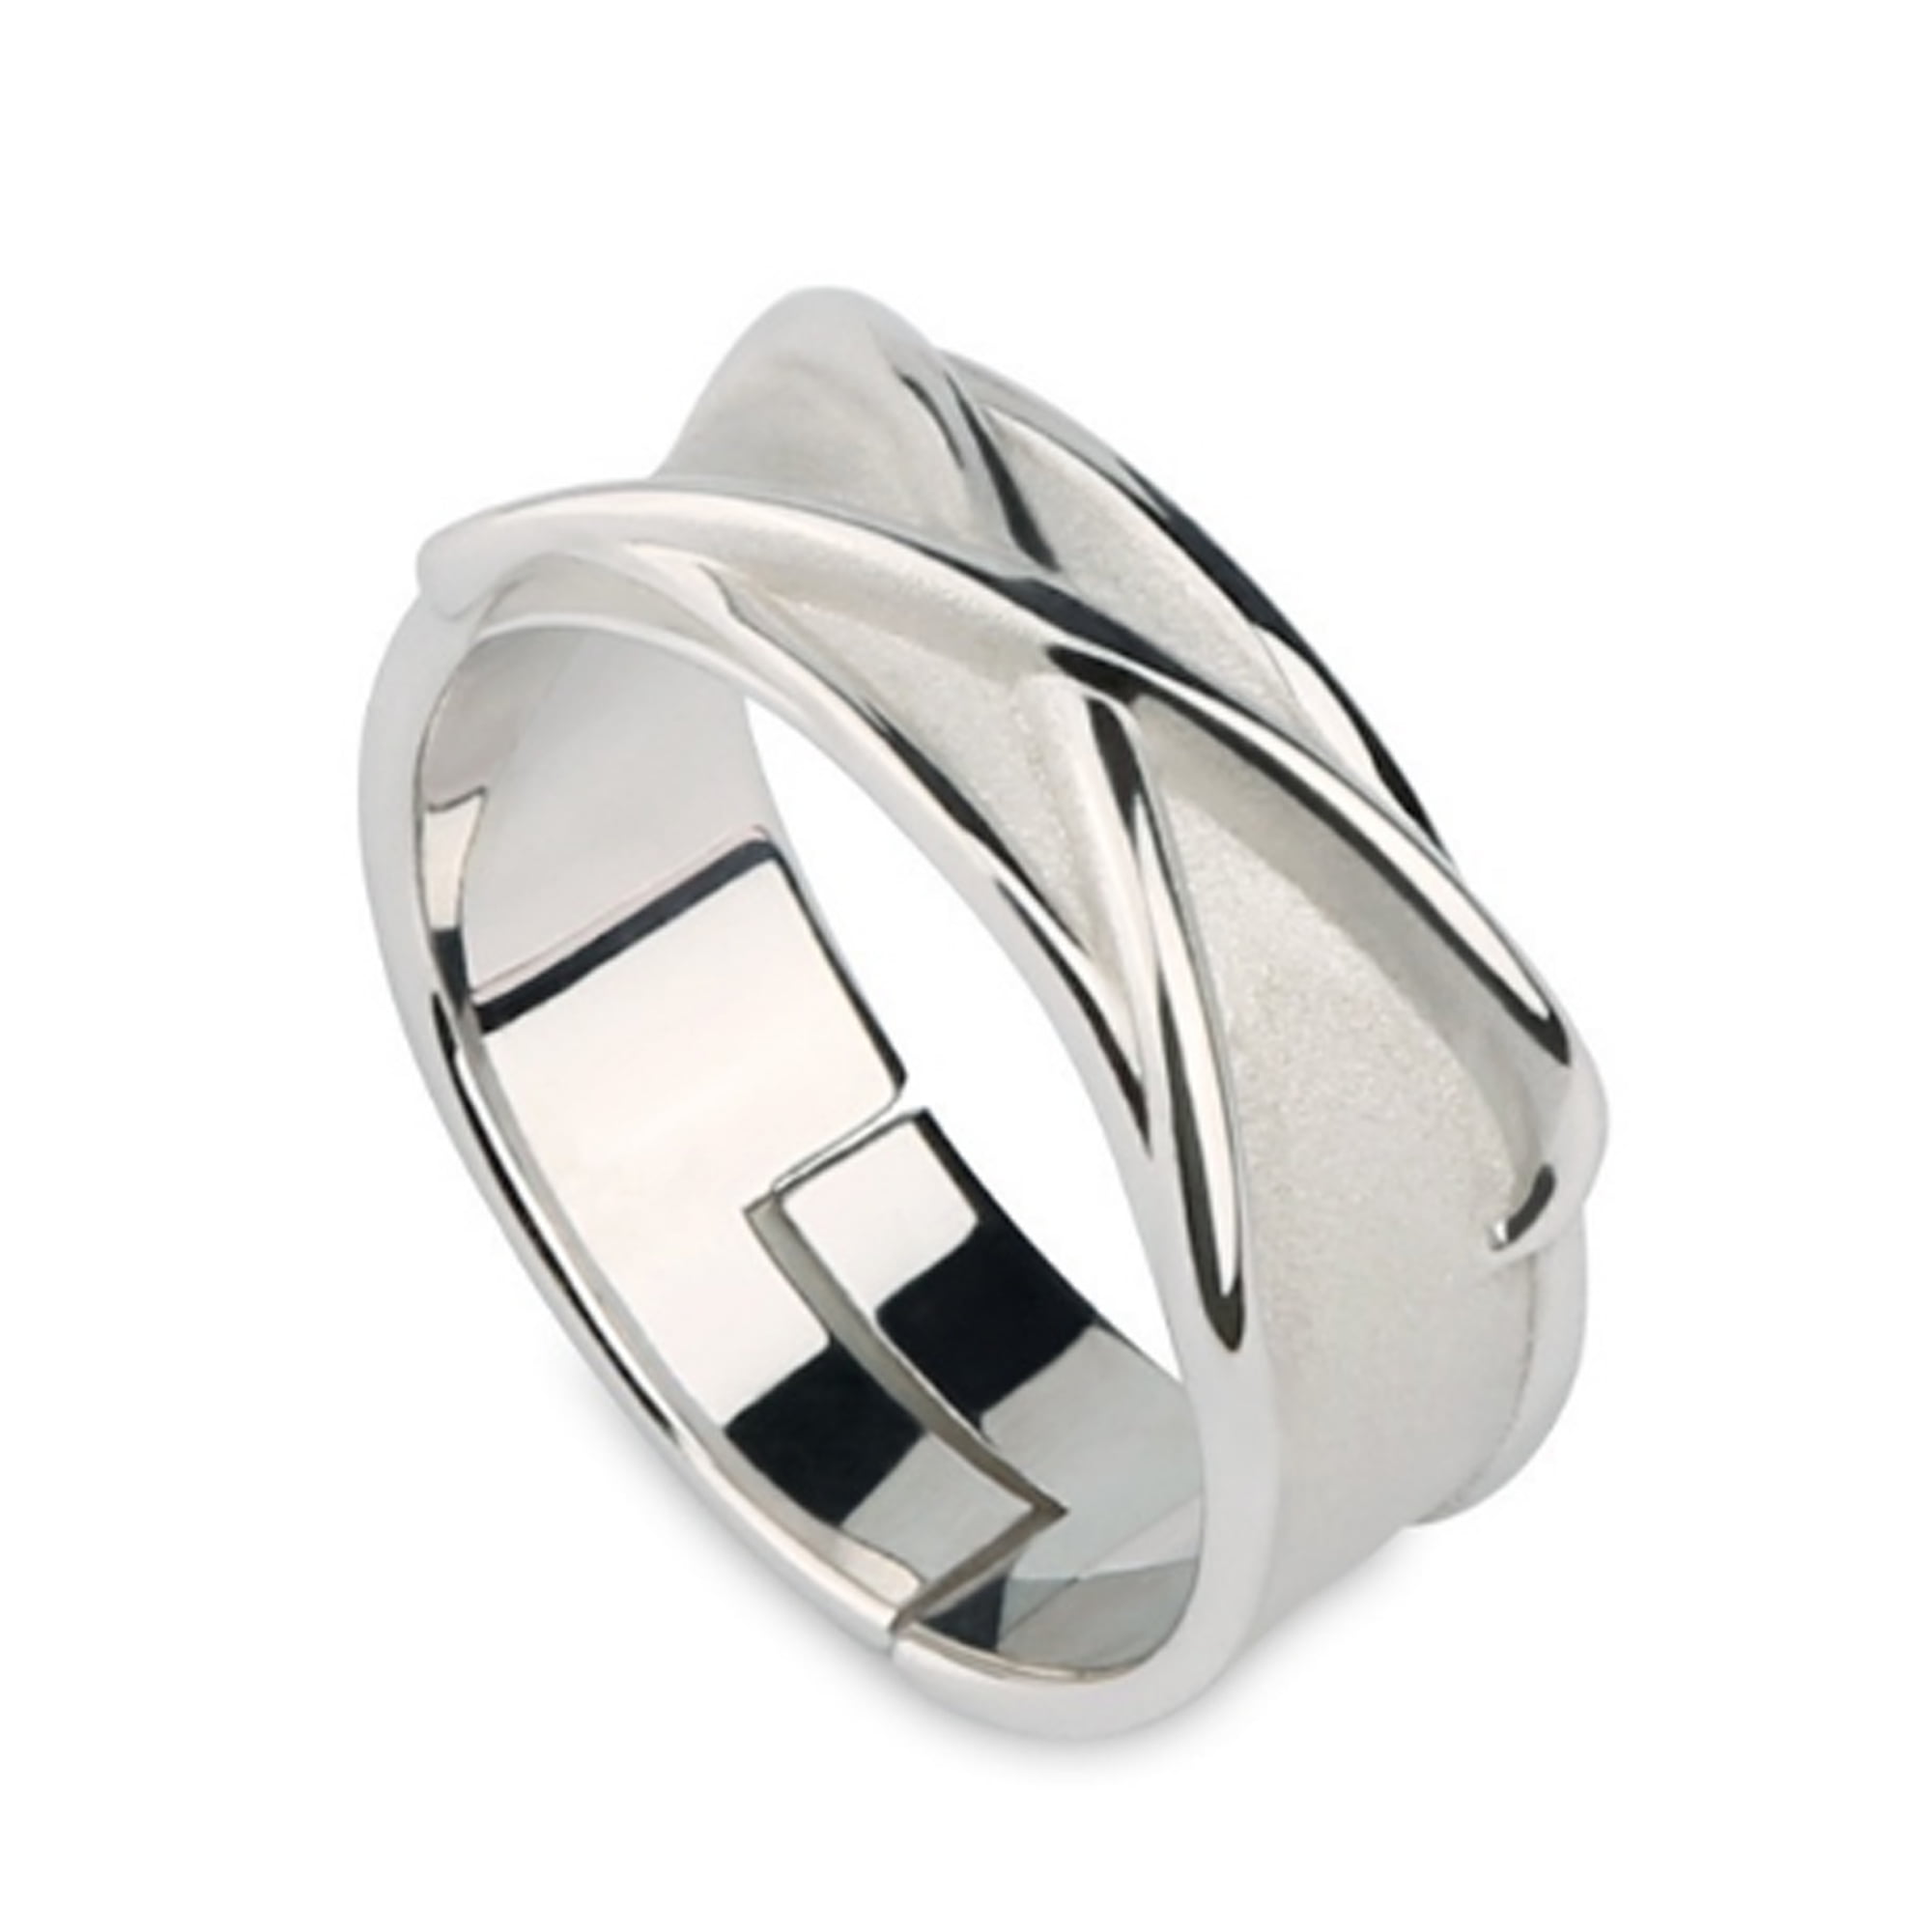 Order Now for Graduation, Freestyle Men's Band Class Ring Sterling Silver,  Personalized, High School or College Graduation - Walmart.com